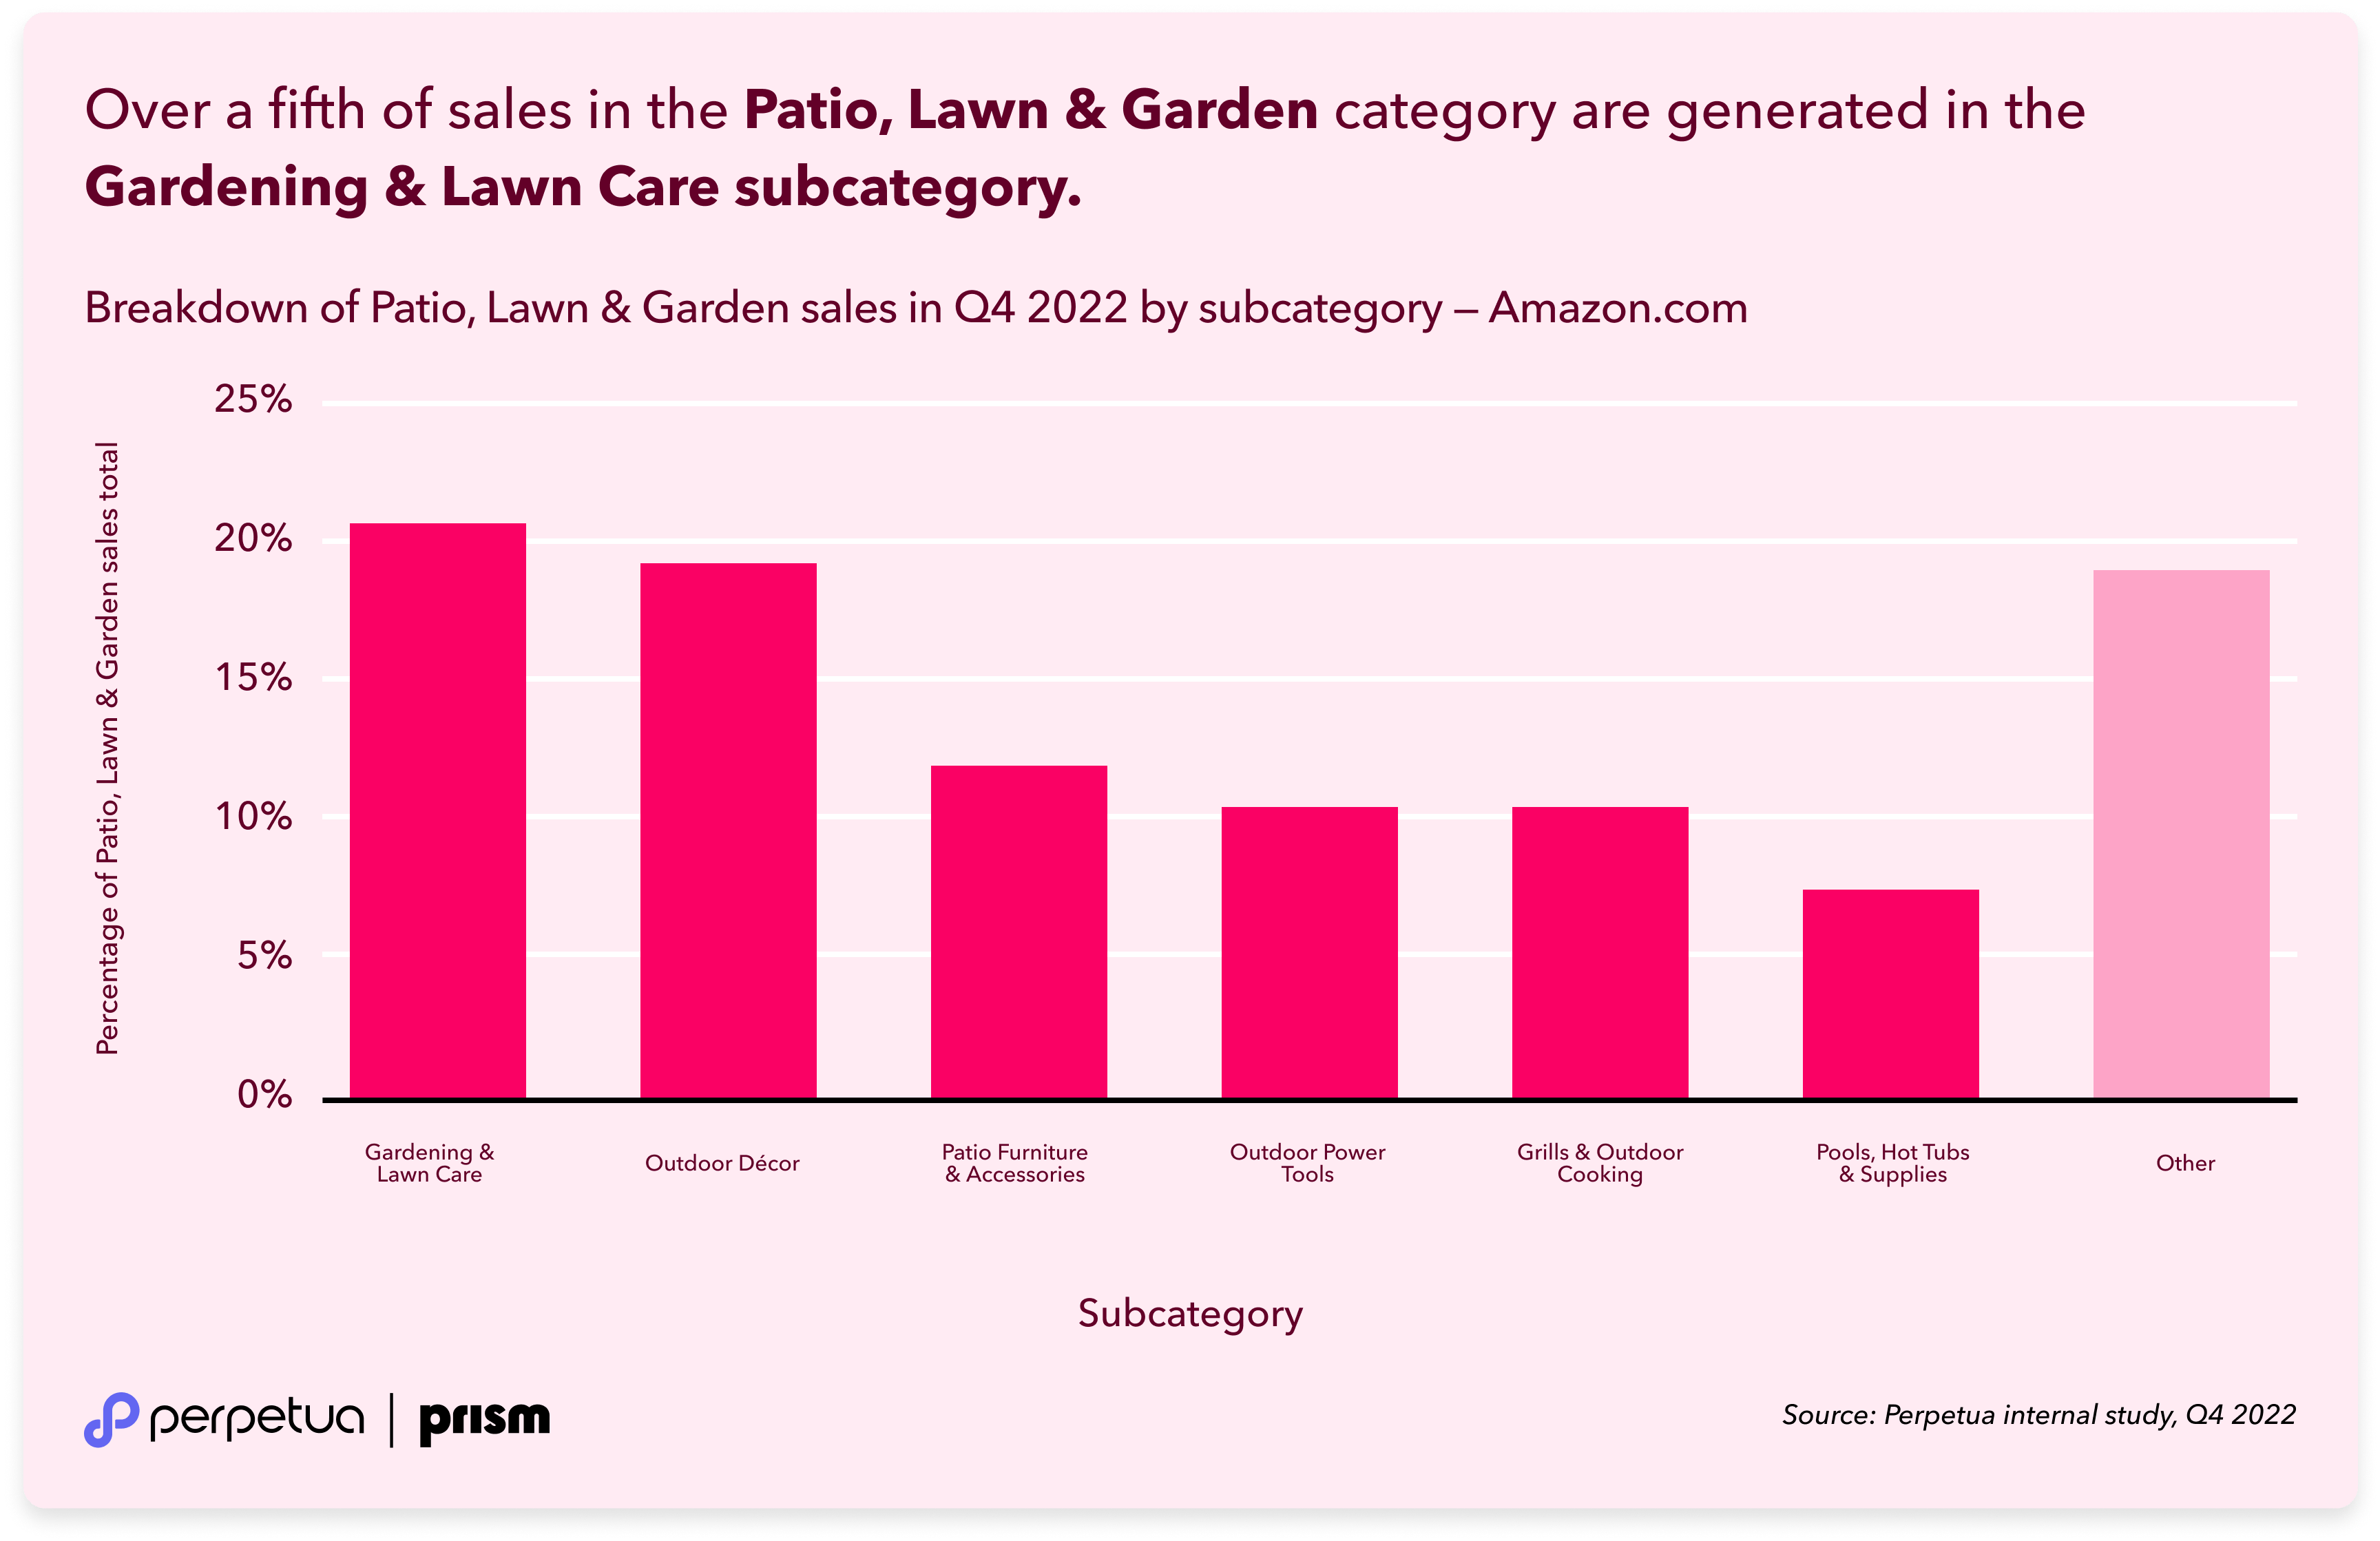 2-Perpetua Prism — Over a fifth of sales in the Patio, Lawn & Garden category are generated in the Gardening & Lawn Care subcategory